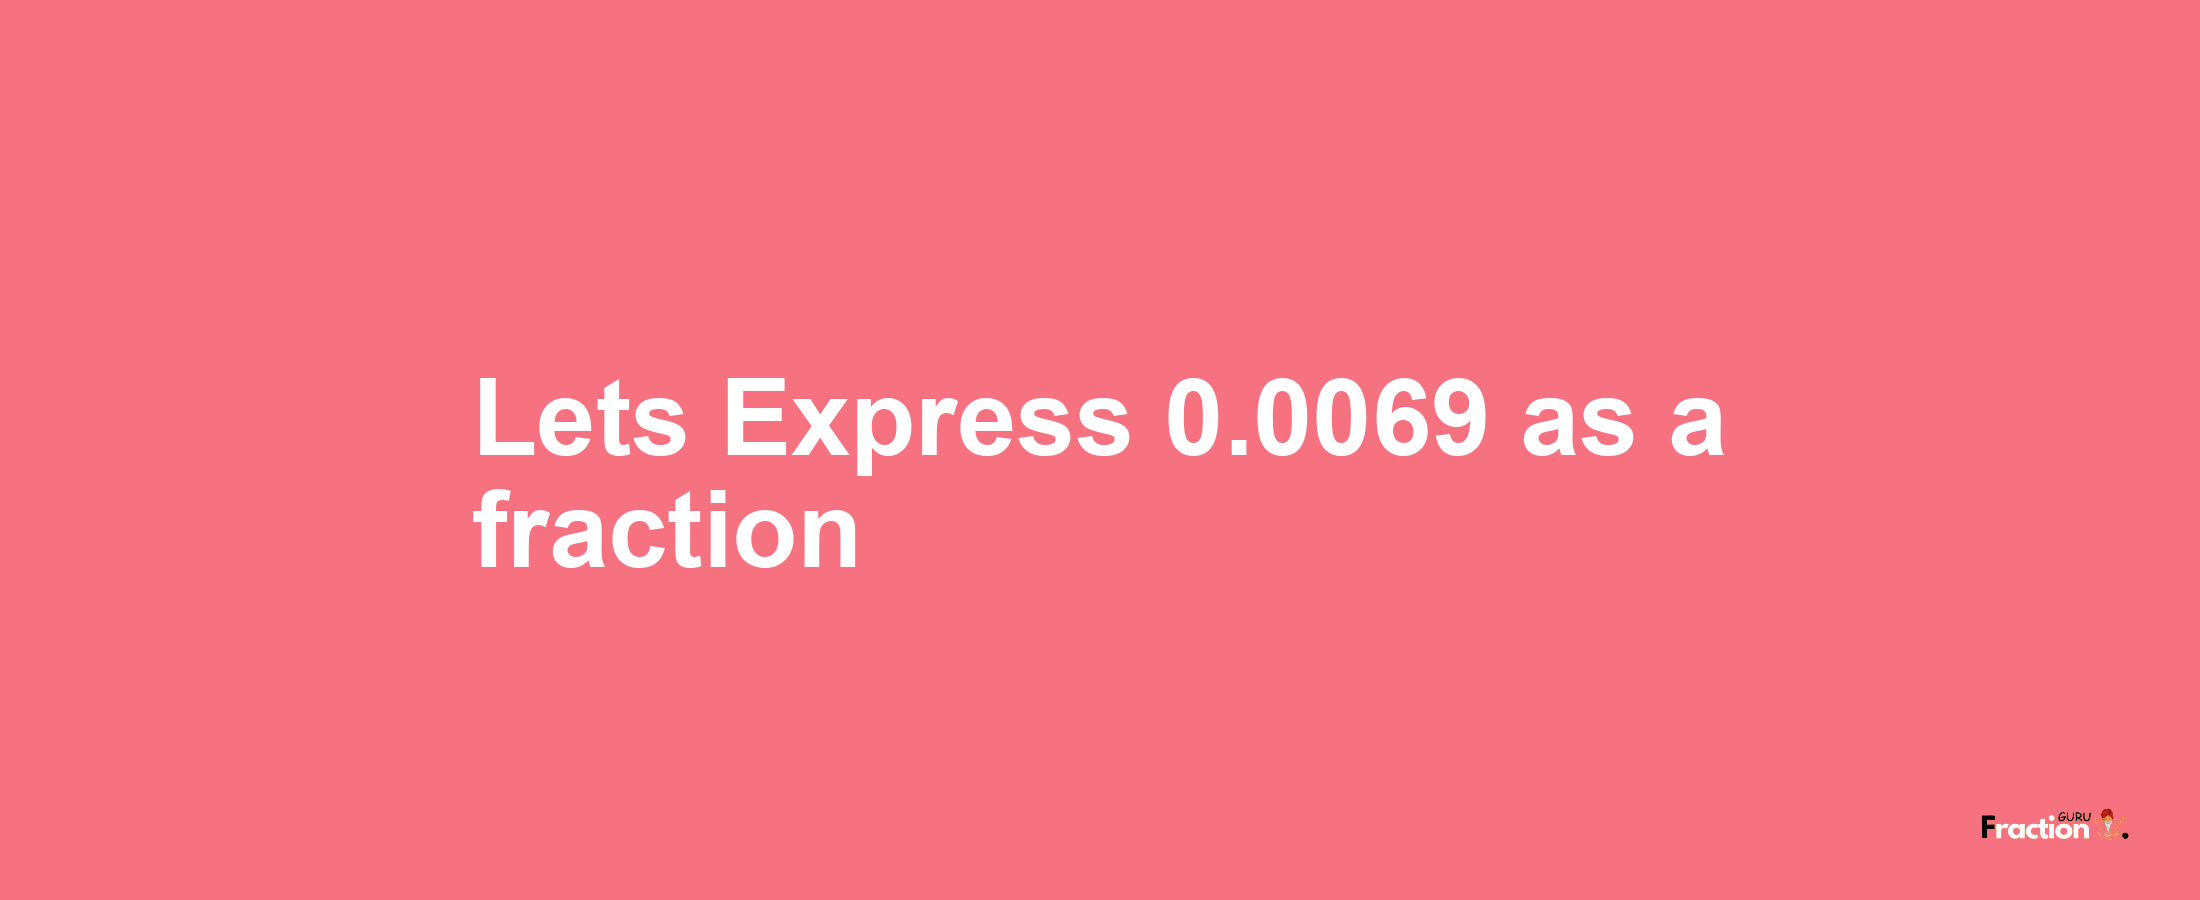 Lets Express 0.0069 as afraction